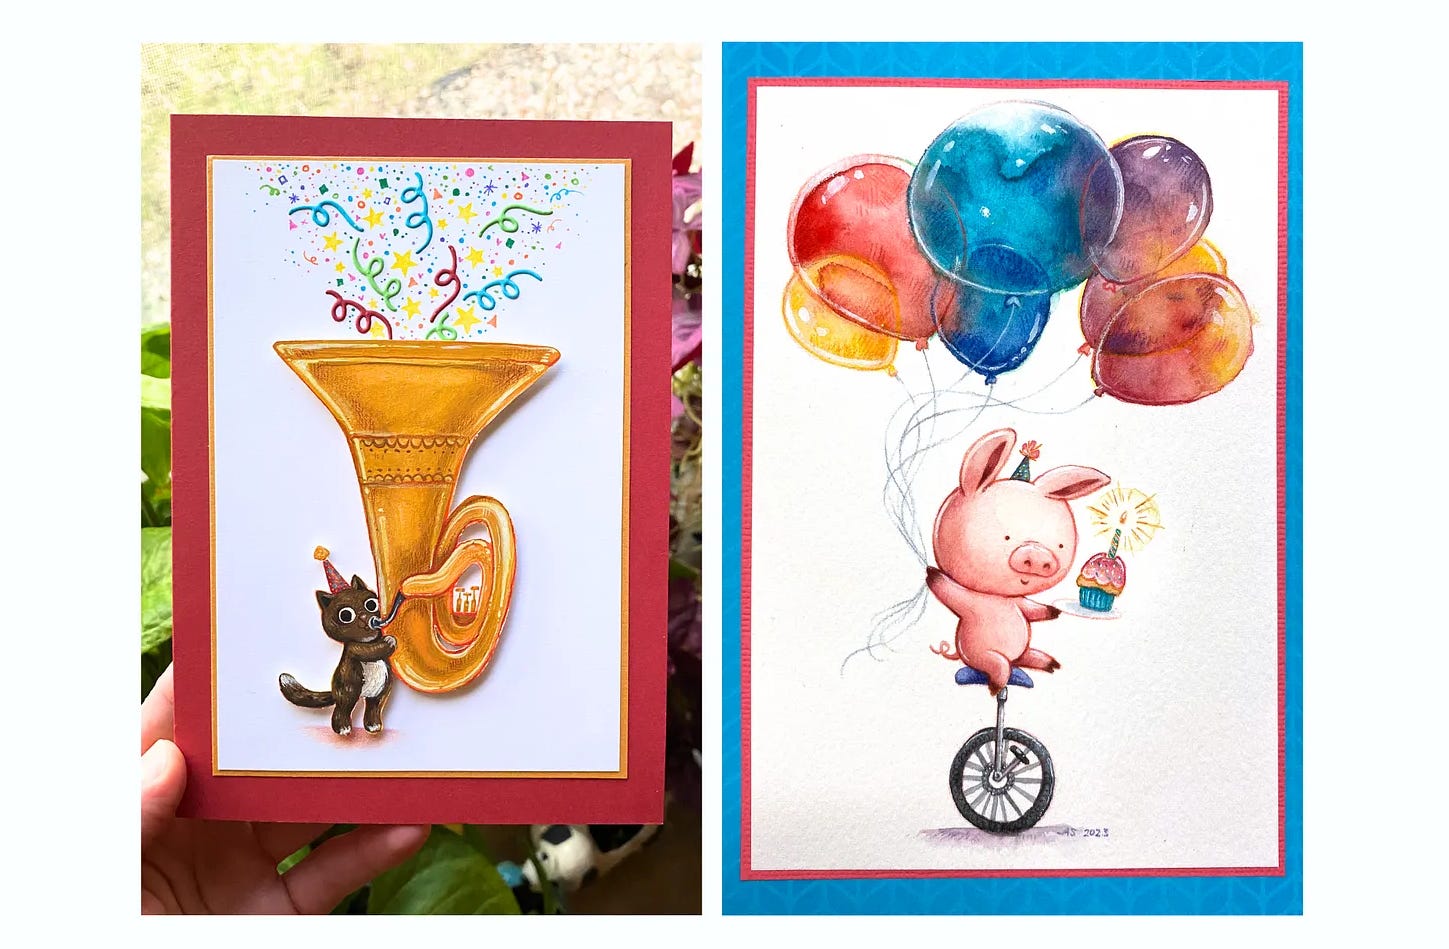 Two birthday cards illustrated by Alyssa Sinnen. On the left, a cat wearing a party hat plays an enormous tuba, from which a burst of confetti comes forth. On the right, a pig riding a unicycle holds a cupcake and a bunch of balloons.